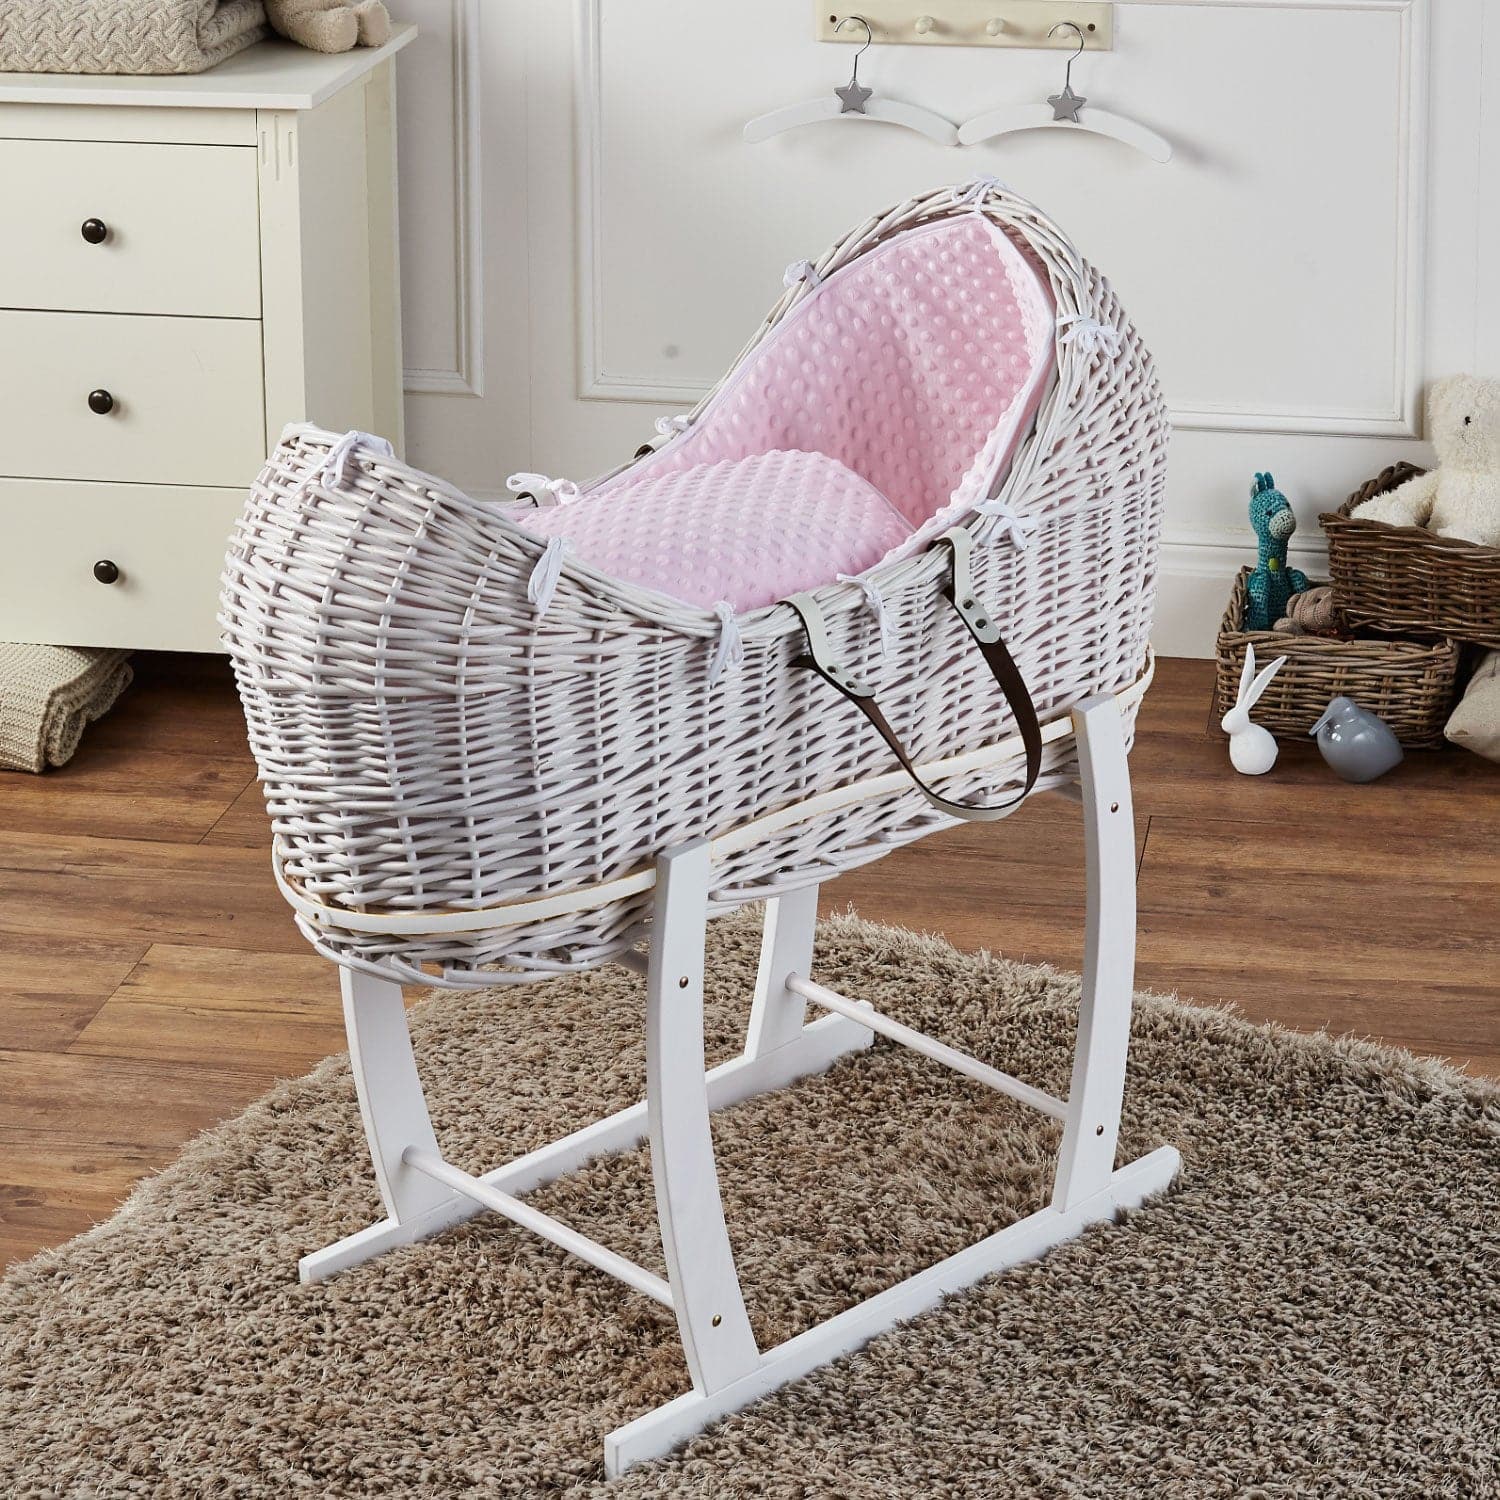 Wicker Deluxe Pod Baby Moses Basket With Stand - White / Dimple / Pink | For Your Little One